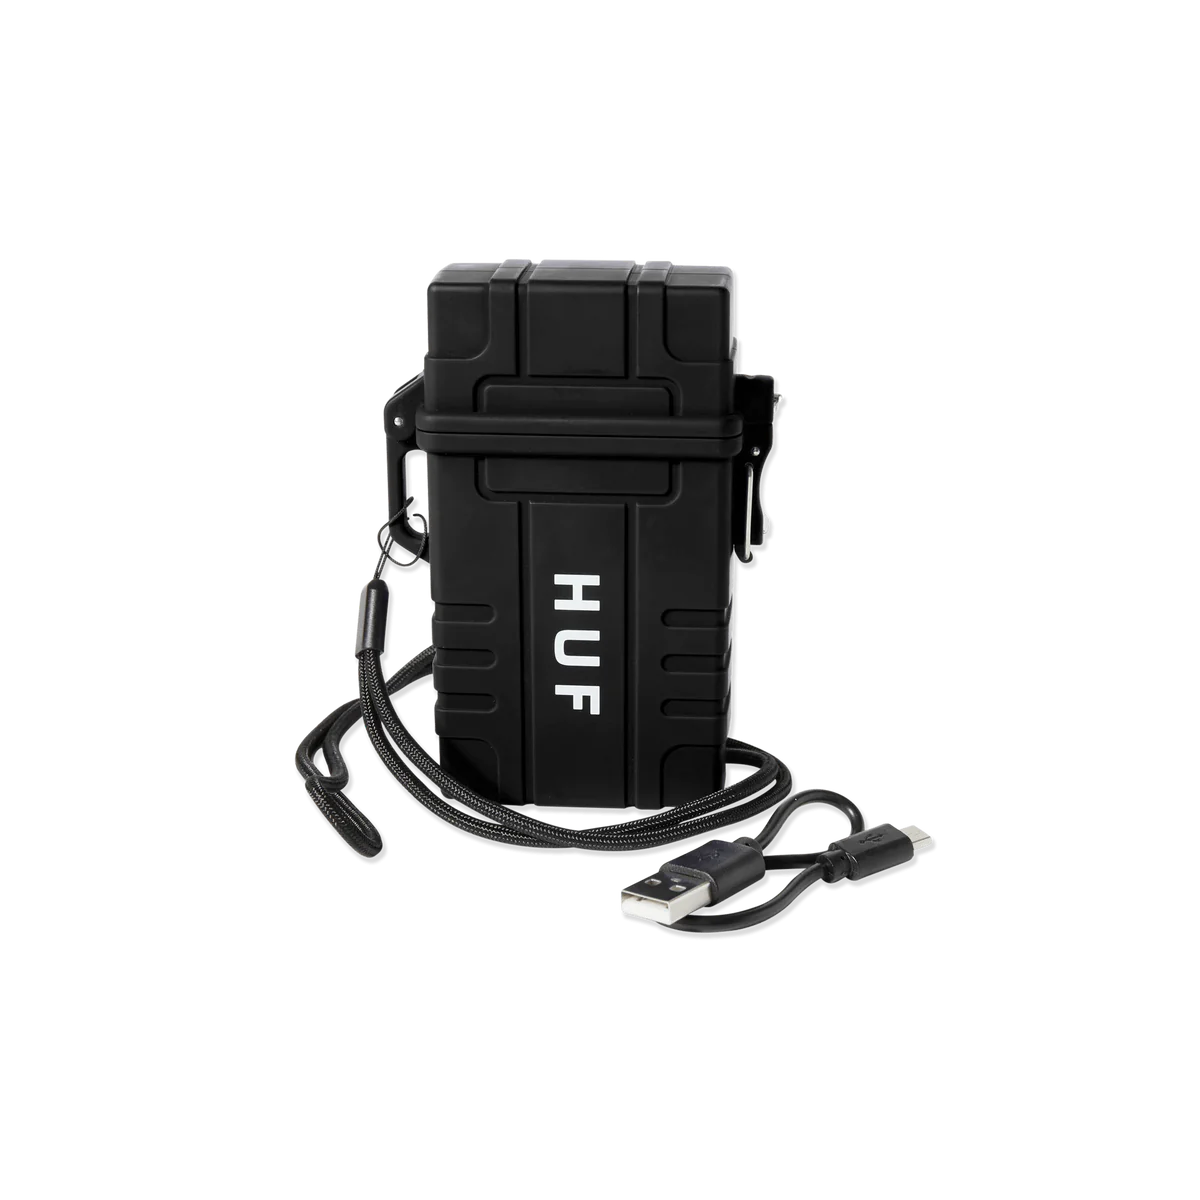 Huf Expedition Waterproof Case